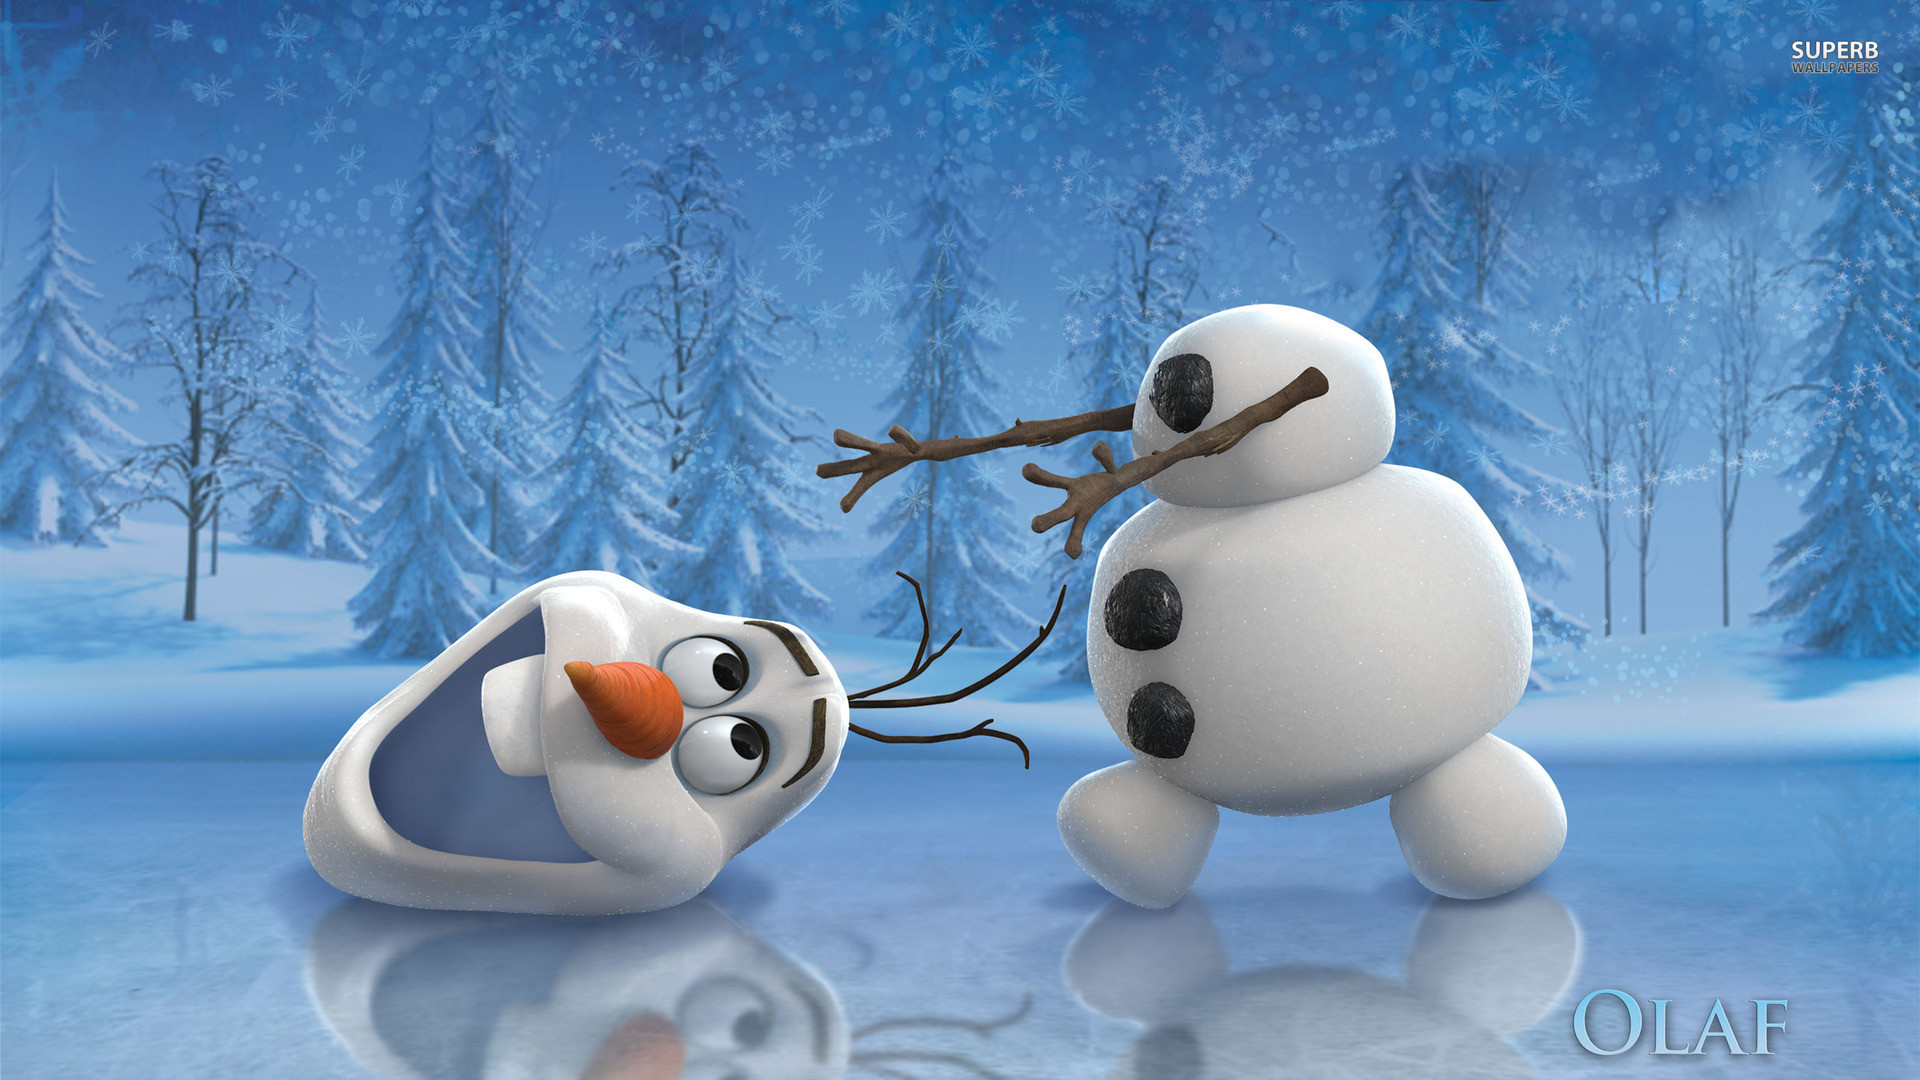 1920x1080 Funny Olaf in Frozen Movie Exclusive HD Wallpapers